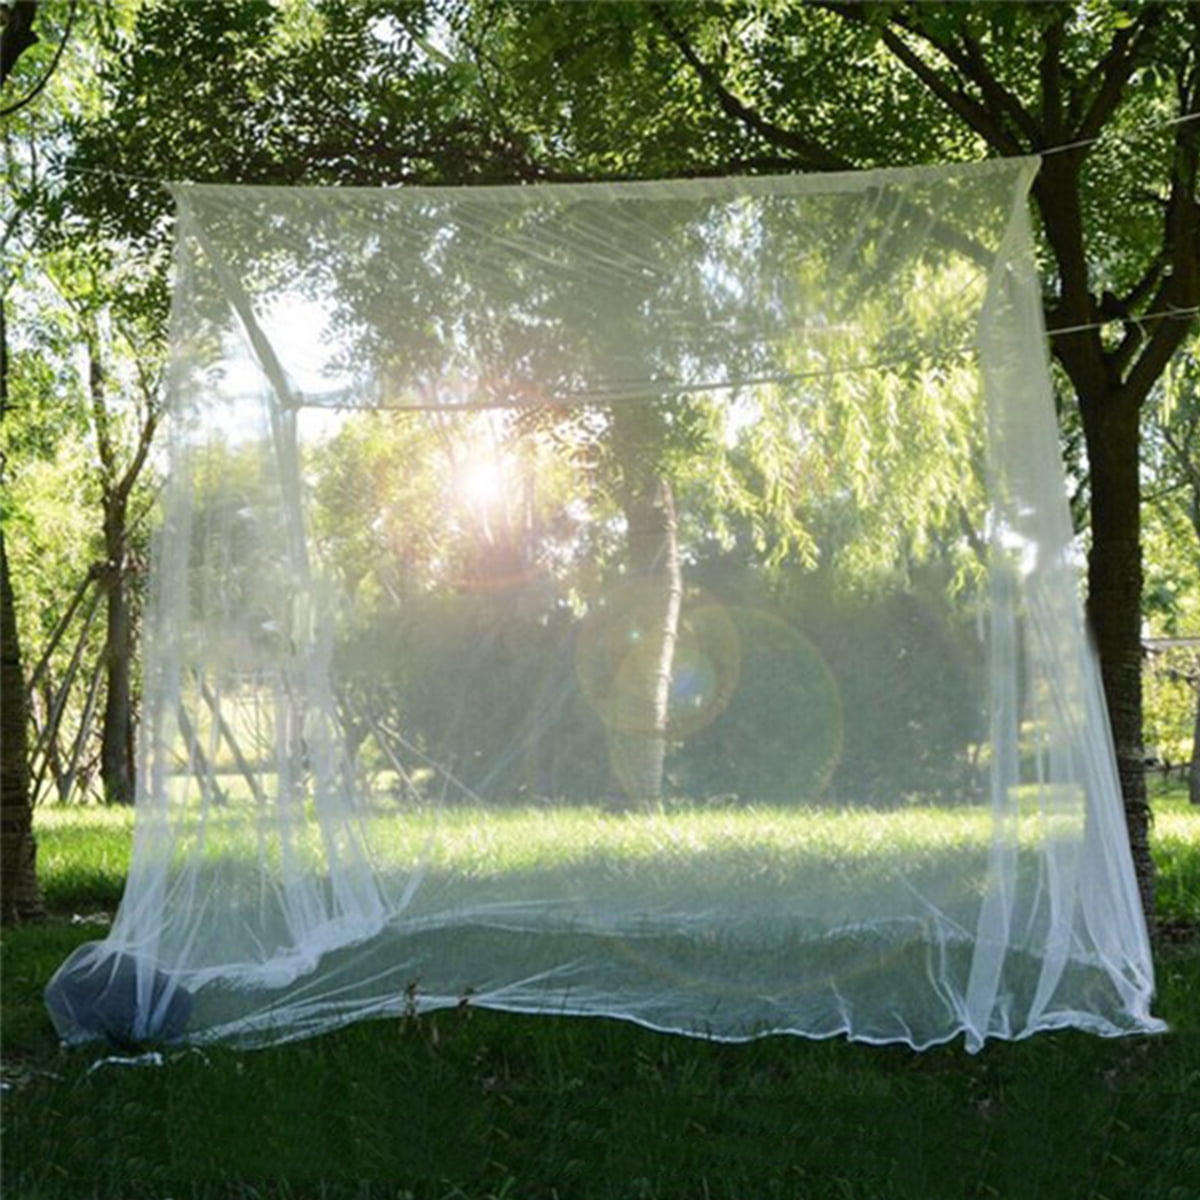 Portable Large Camping Mosquito Net Indoor Outdoor Insect Netting Tent Storage